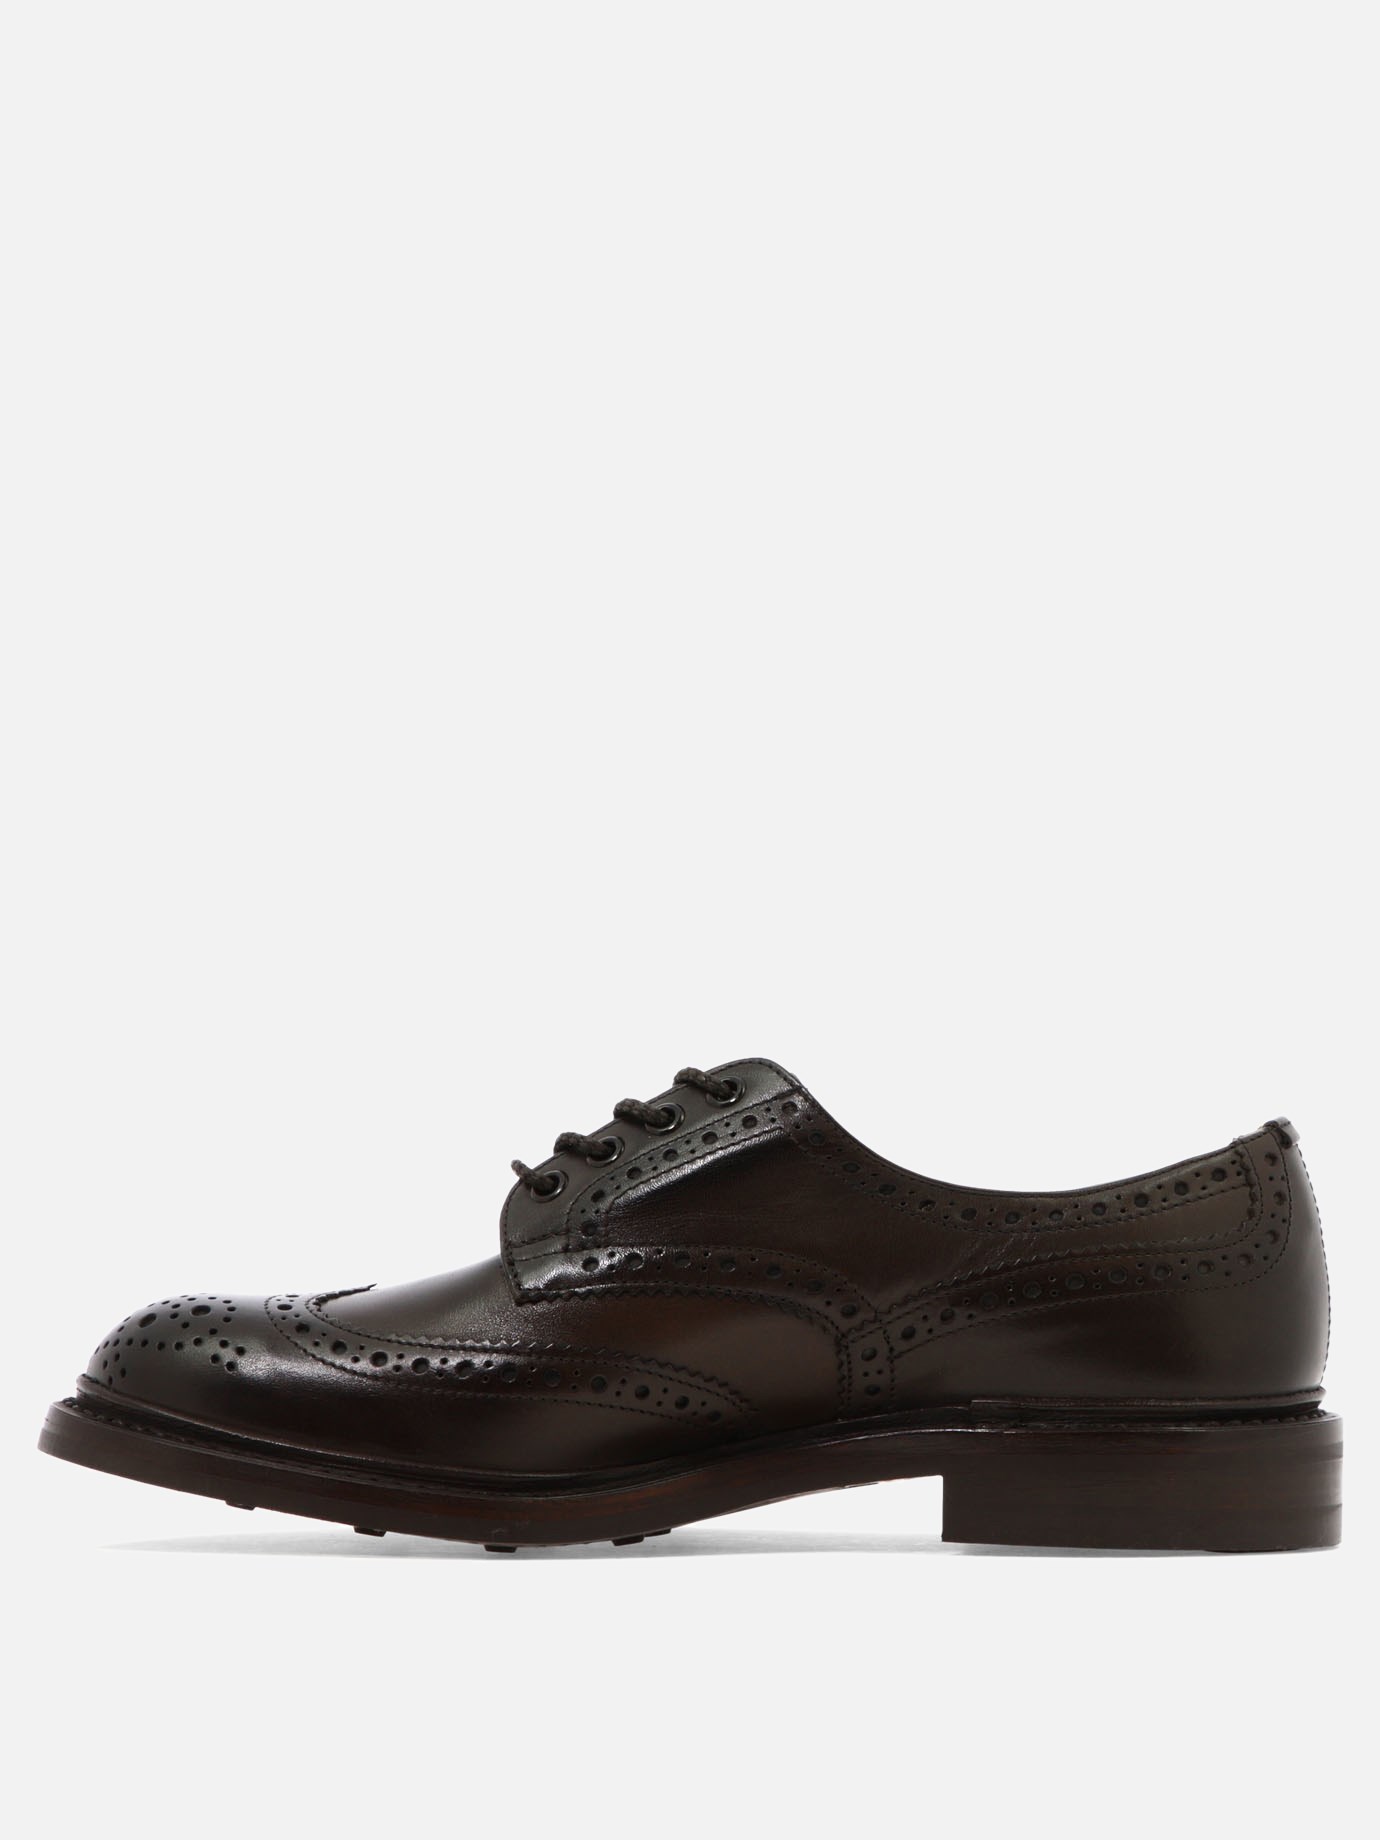  Bourton  lace-up shoes by Tricker's